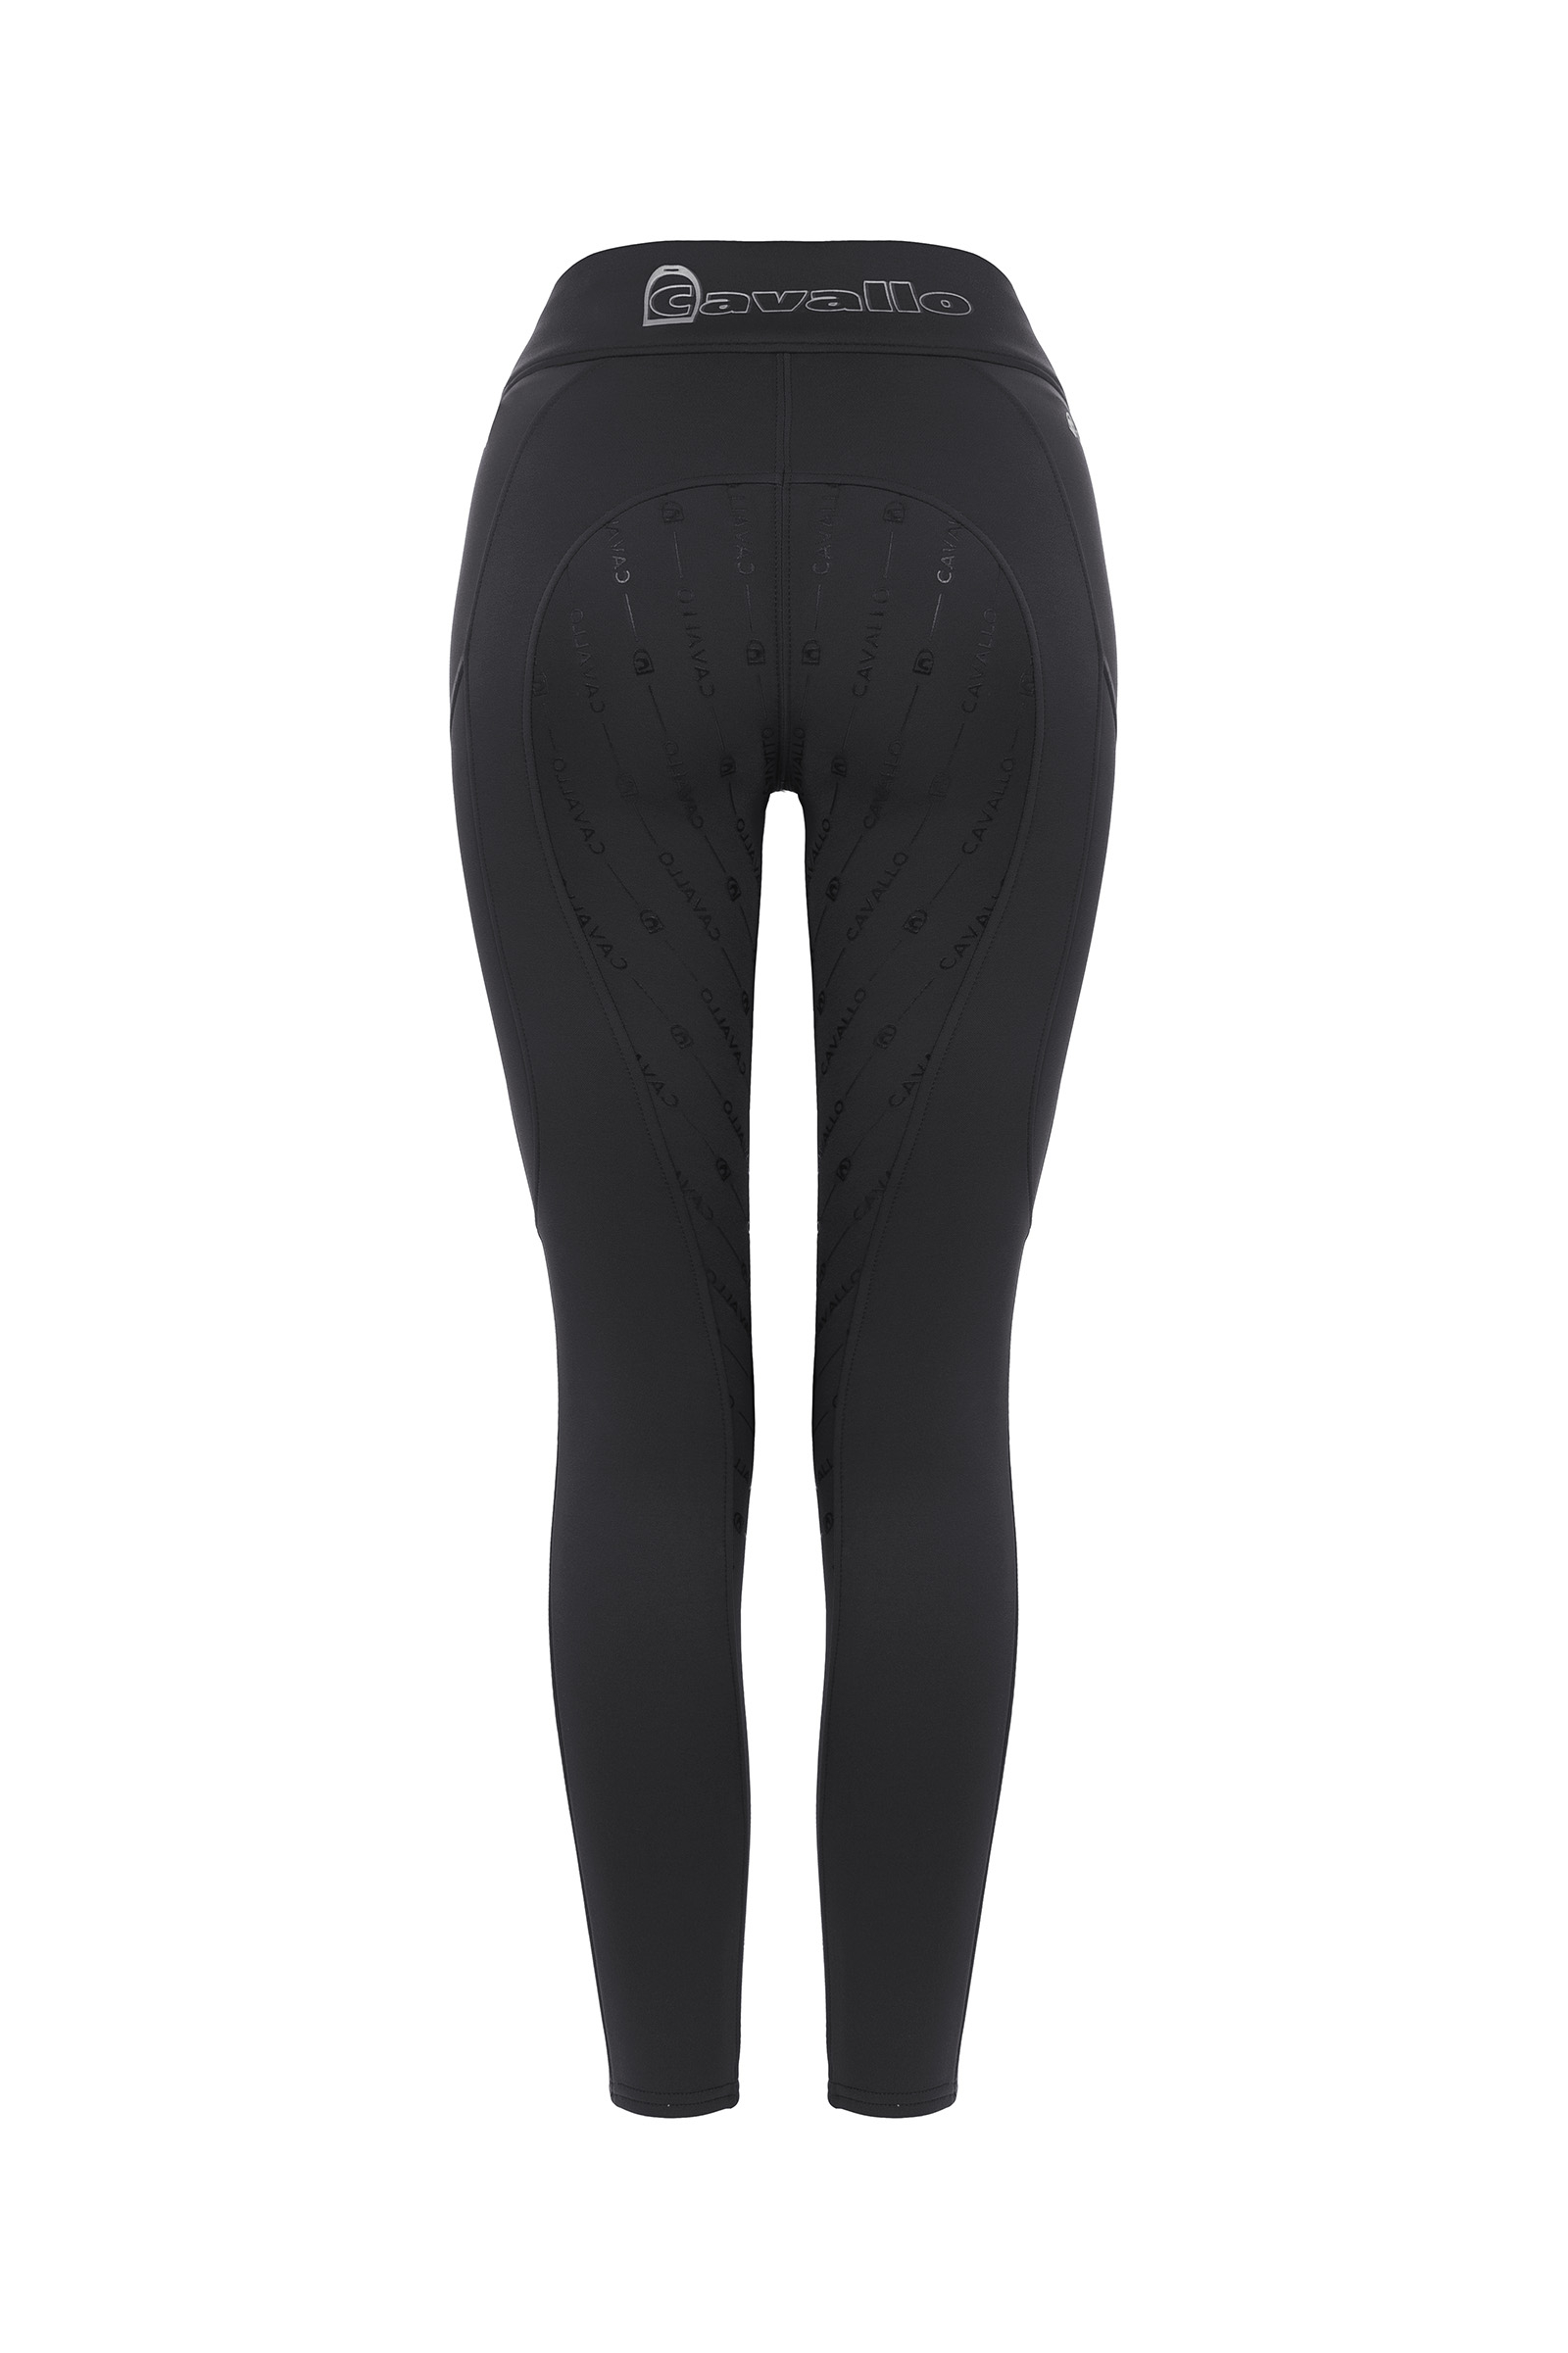 Montar Ebba Pull-On Tights - Black, Fullgrip – Horse By Horse